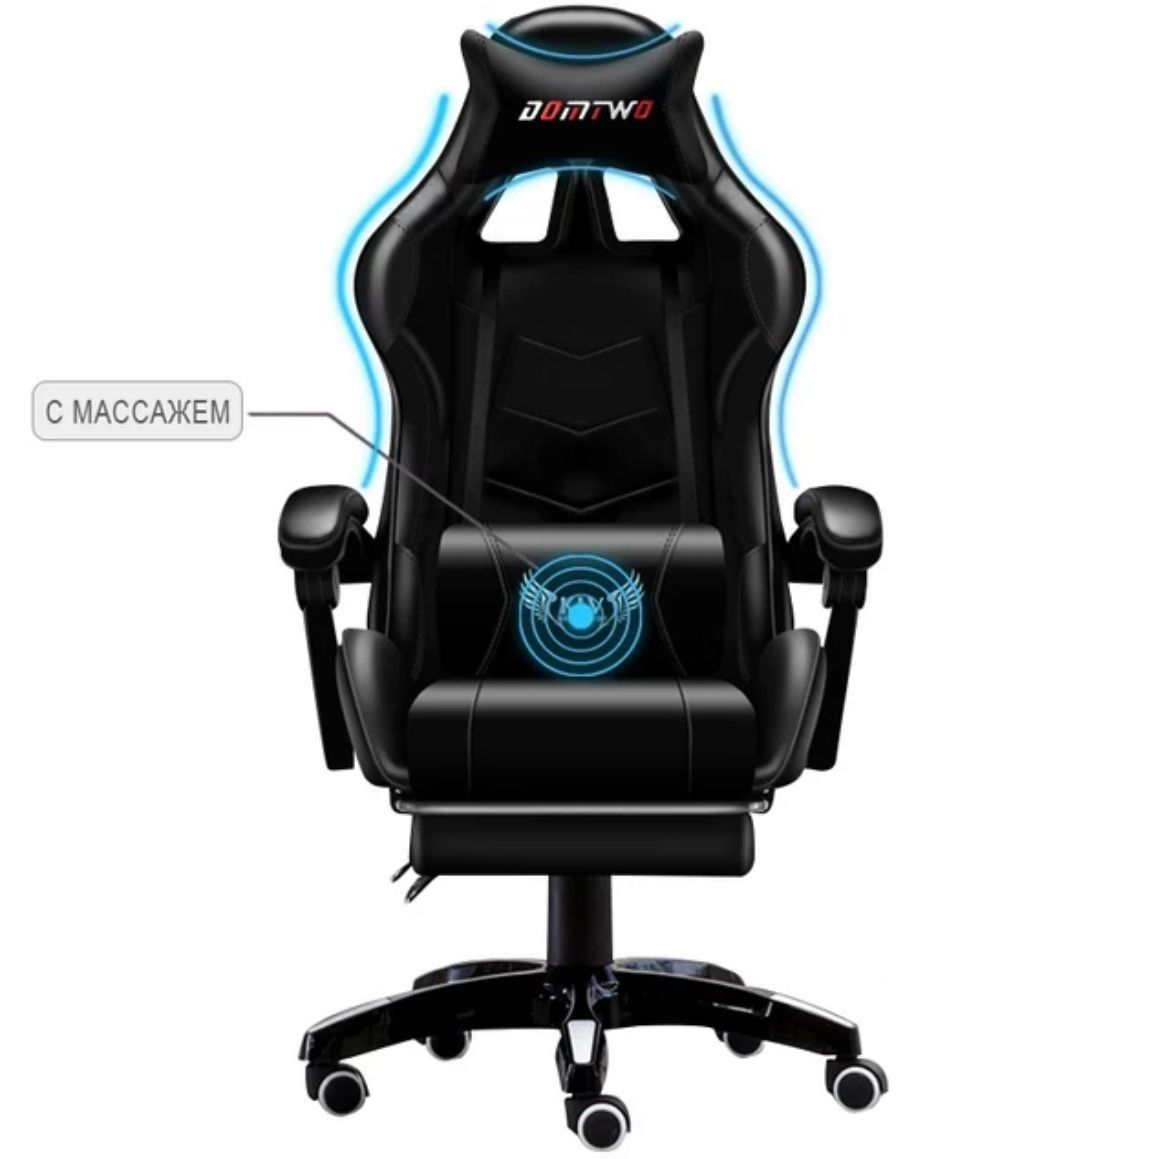 Avery gaming chair